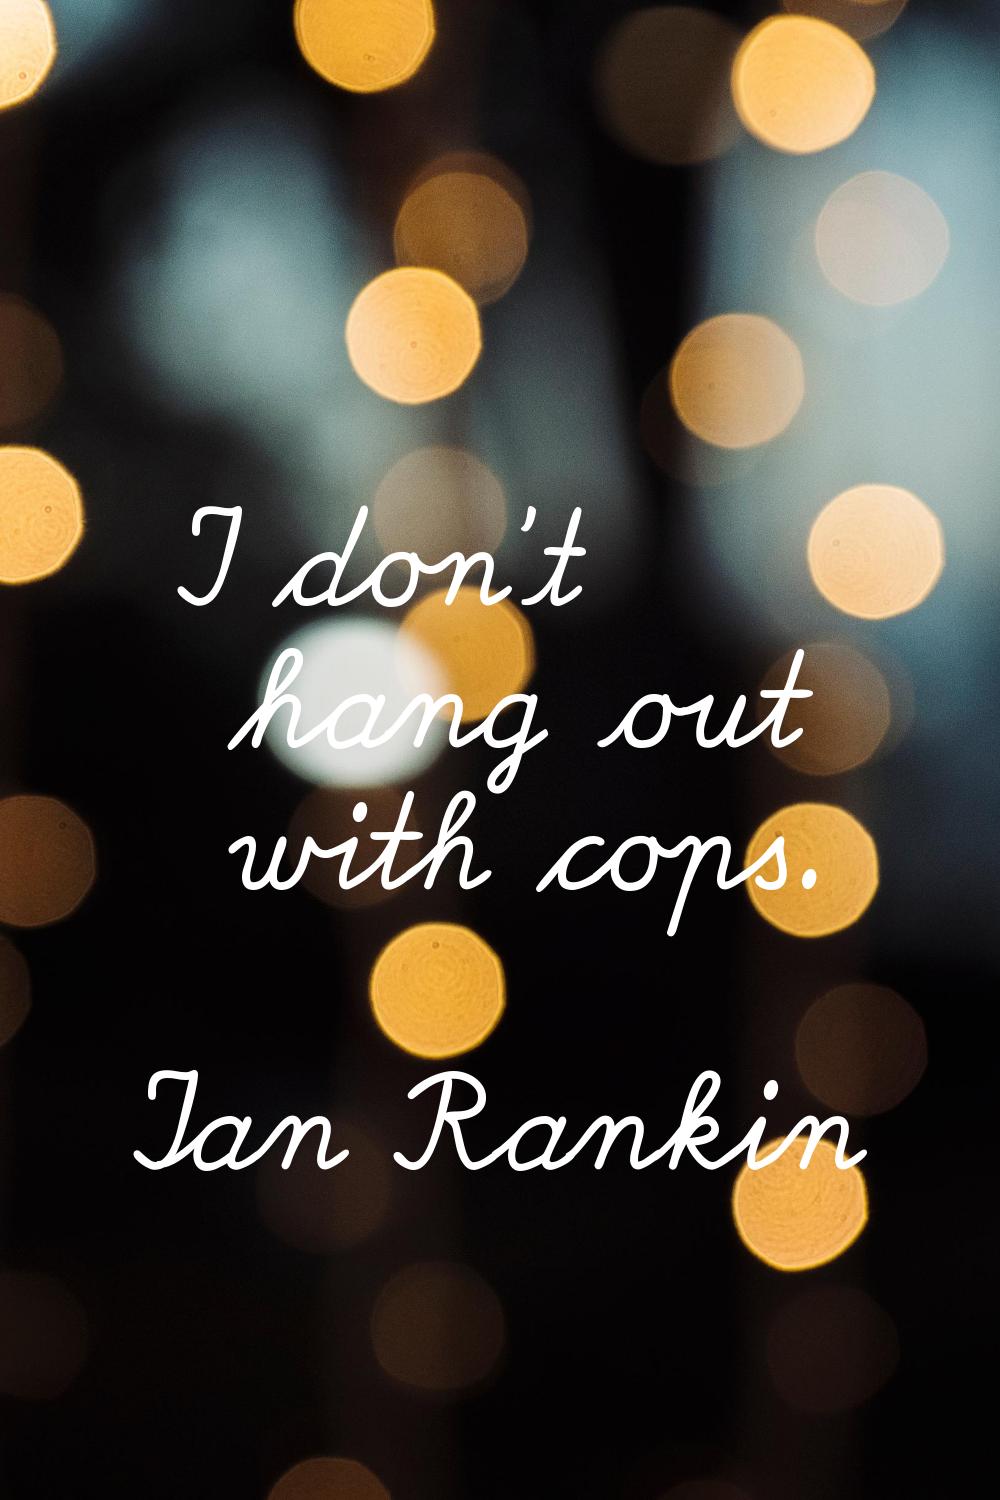 I don't hang out with cops.